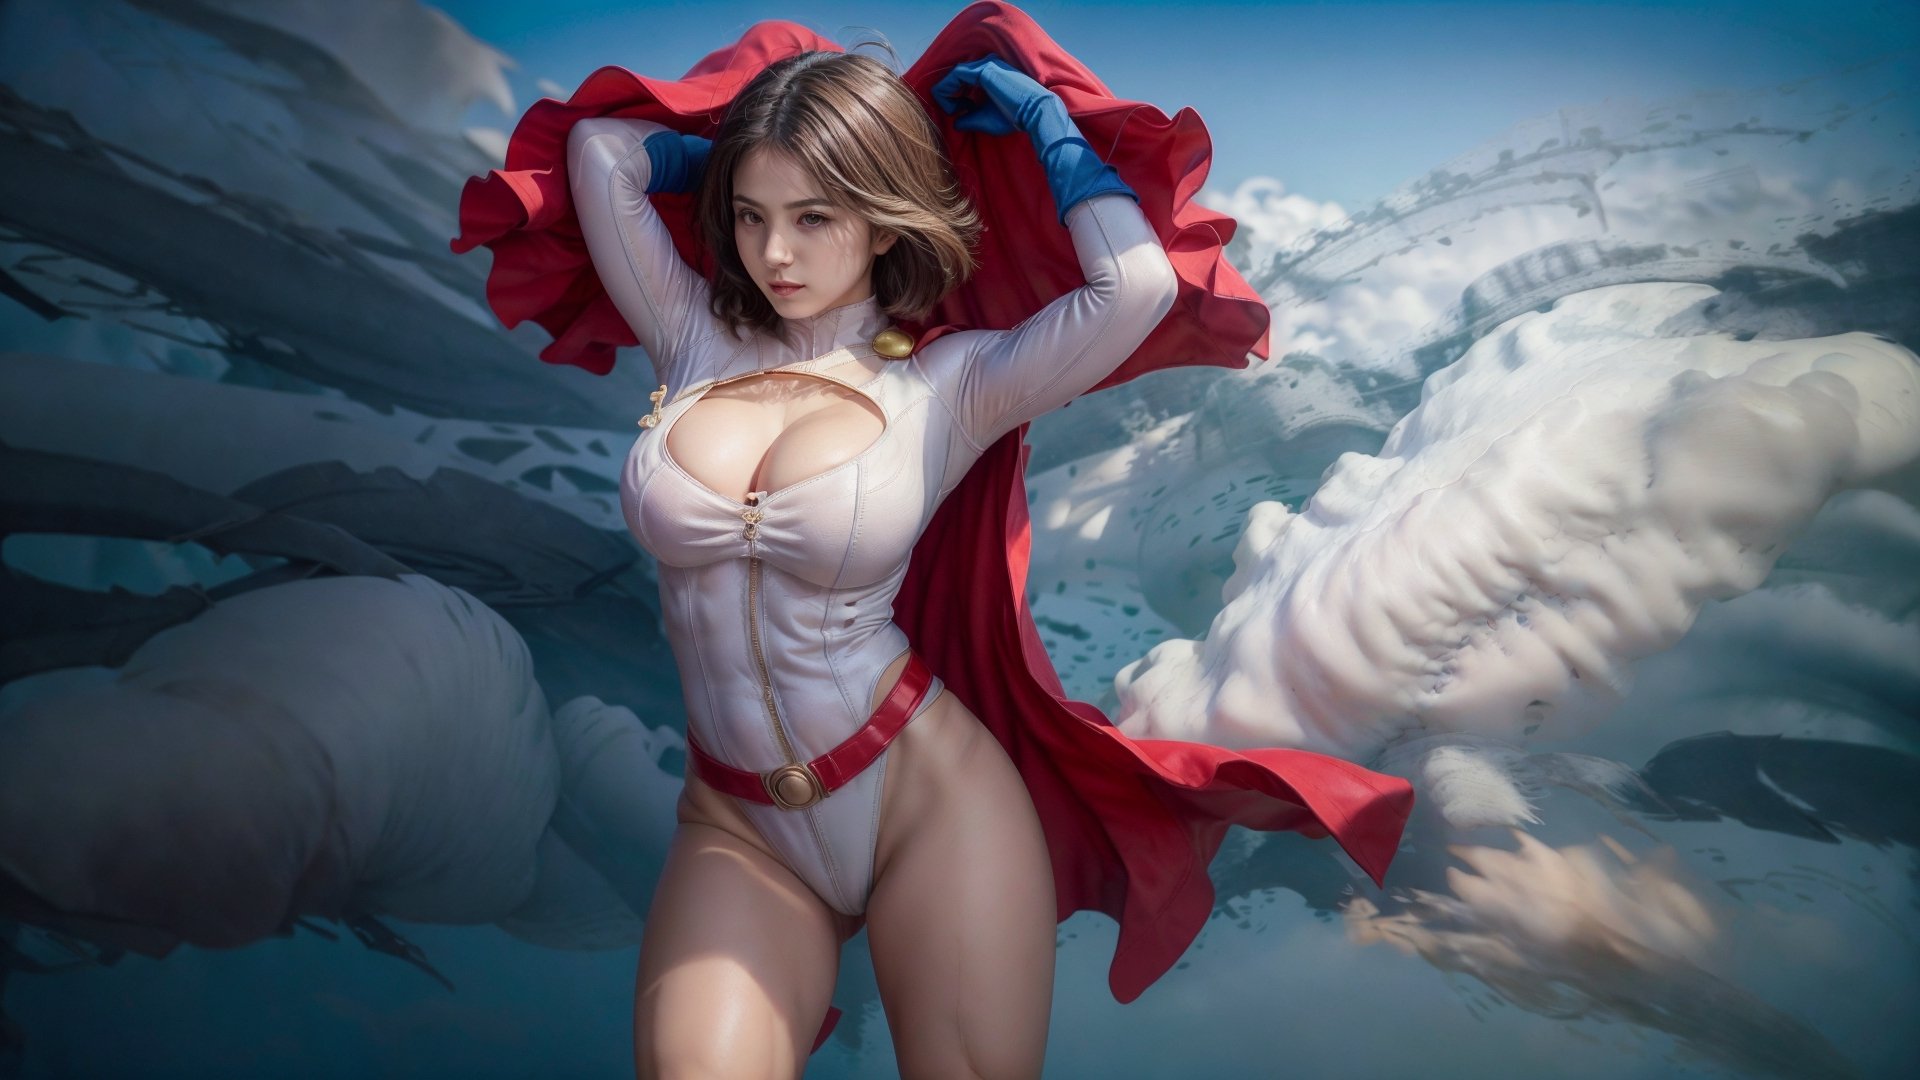 (Power girl:1.2), (power girl DC), (blonde hair), (bob cut), white latex, (elbow length gloves:1.2), cleavage, skin tight, (leotard), (cleavage hole), (cleavage circle), (boob window), (white latex), shiny, (green boots:1.2), (high-heel boots), (thigh high boots), (white leotard), (blue gloves:1.2), (red cape), (sash cape), (blue boots), (red belt:1.2), (Gigantic breasts), (gigantic cleavage), (muscular woman:1.2), (gigantic breasts), (huge breasts), high detail, long legs, (Gigantic breasts), (Massive breasts), (muscular woman:1.2), huge breasts, high detail, long legs, (athletic woman), (very tiny waist:1.4), Beautiful detailed face, best quality, (layered hair), tiny waist, firm lips, full lips, thin waist, Big breasts, sanpaku eyes, high resolution, high quality, Hair over eyes, ,powergirl,cape,boob window,bul4n,red belt